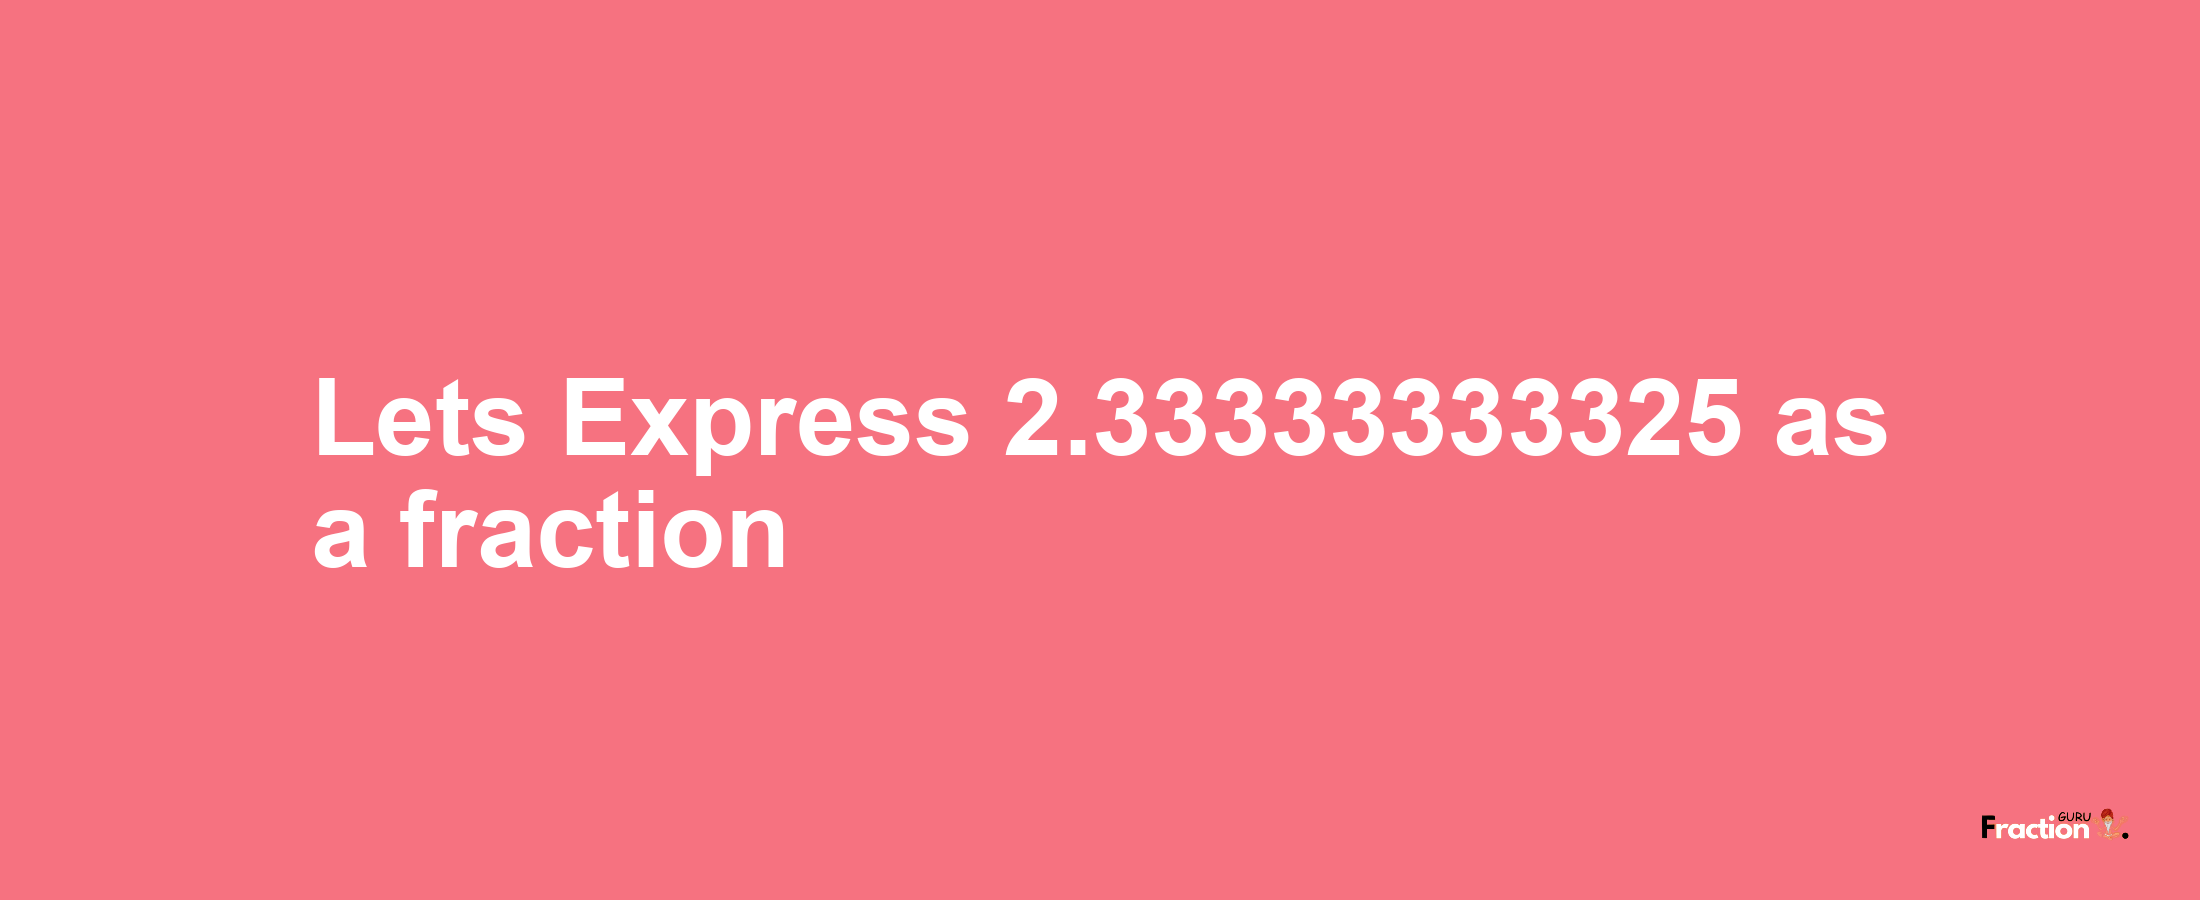 Lets Express 2.33333333325 as afraction